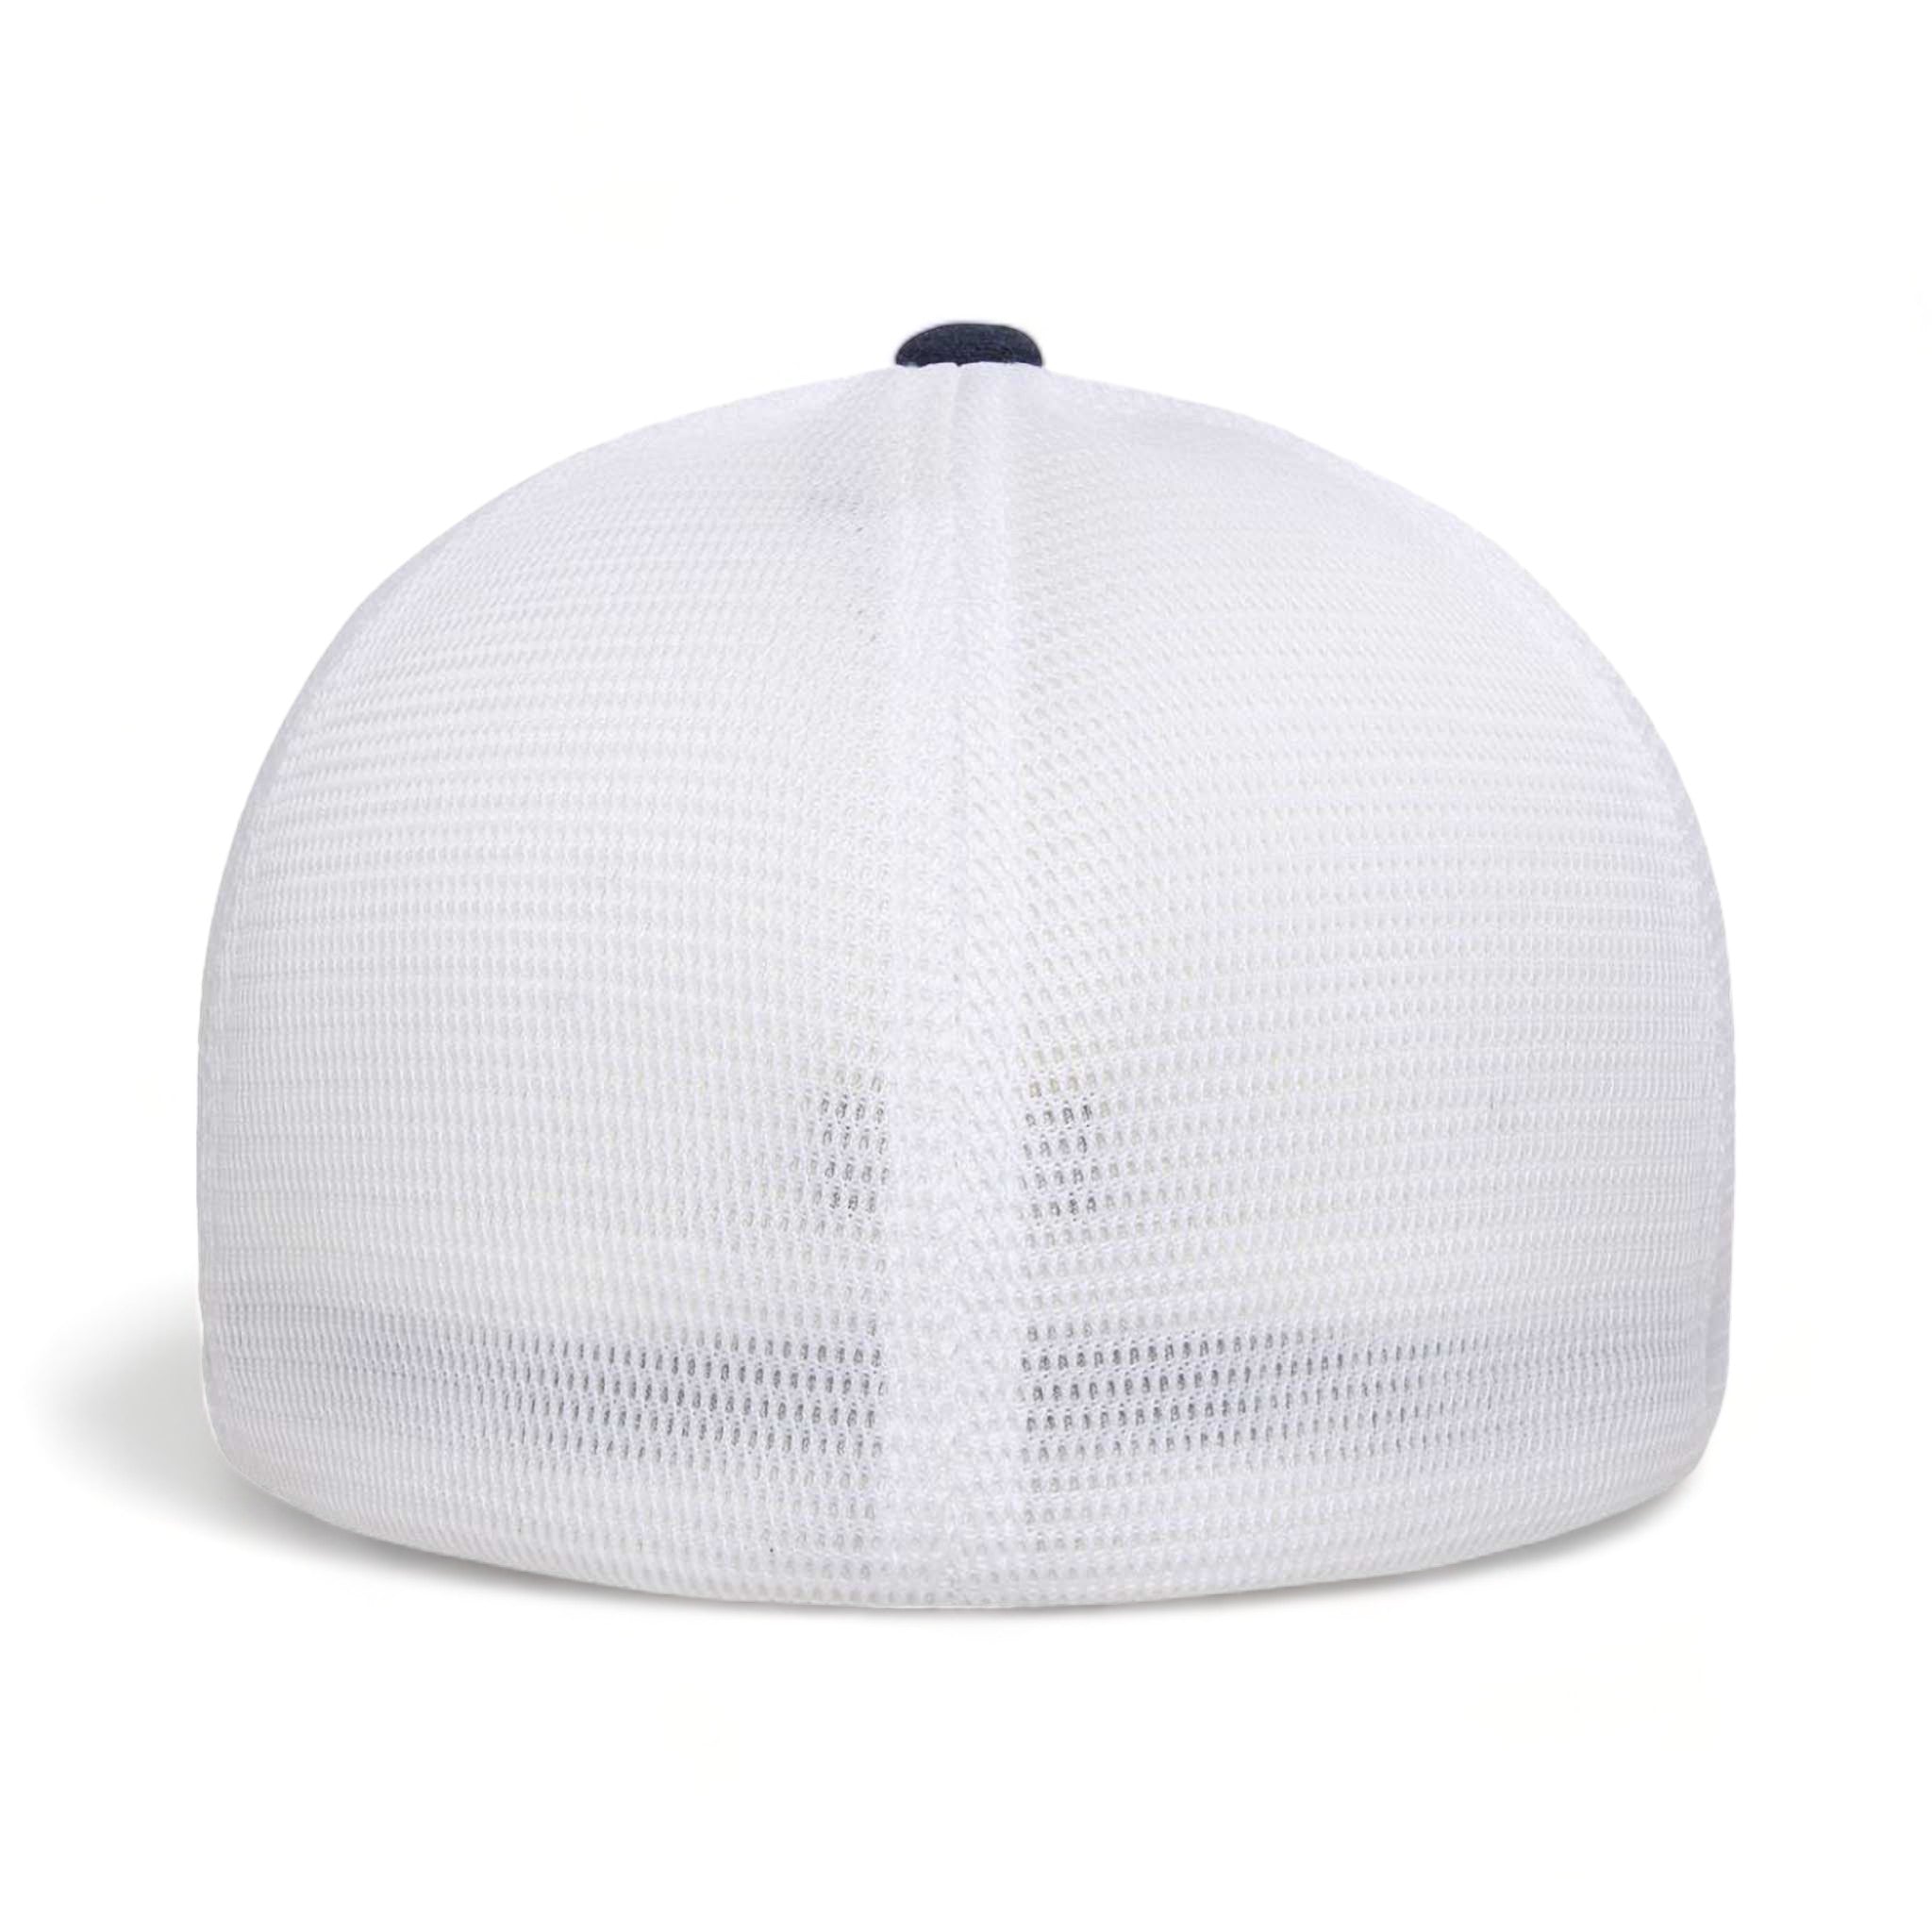 Back view of Flexfit 5511UP custom hat in mélange navy and white